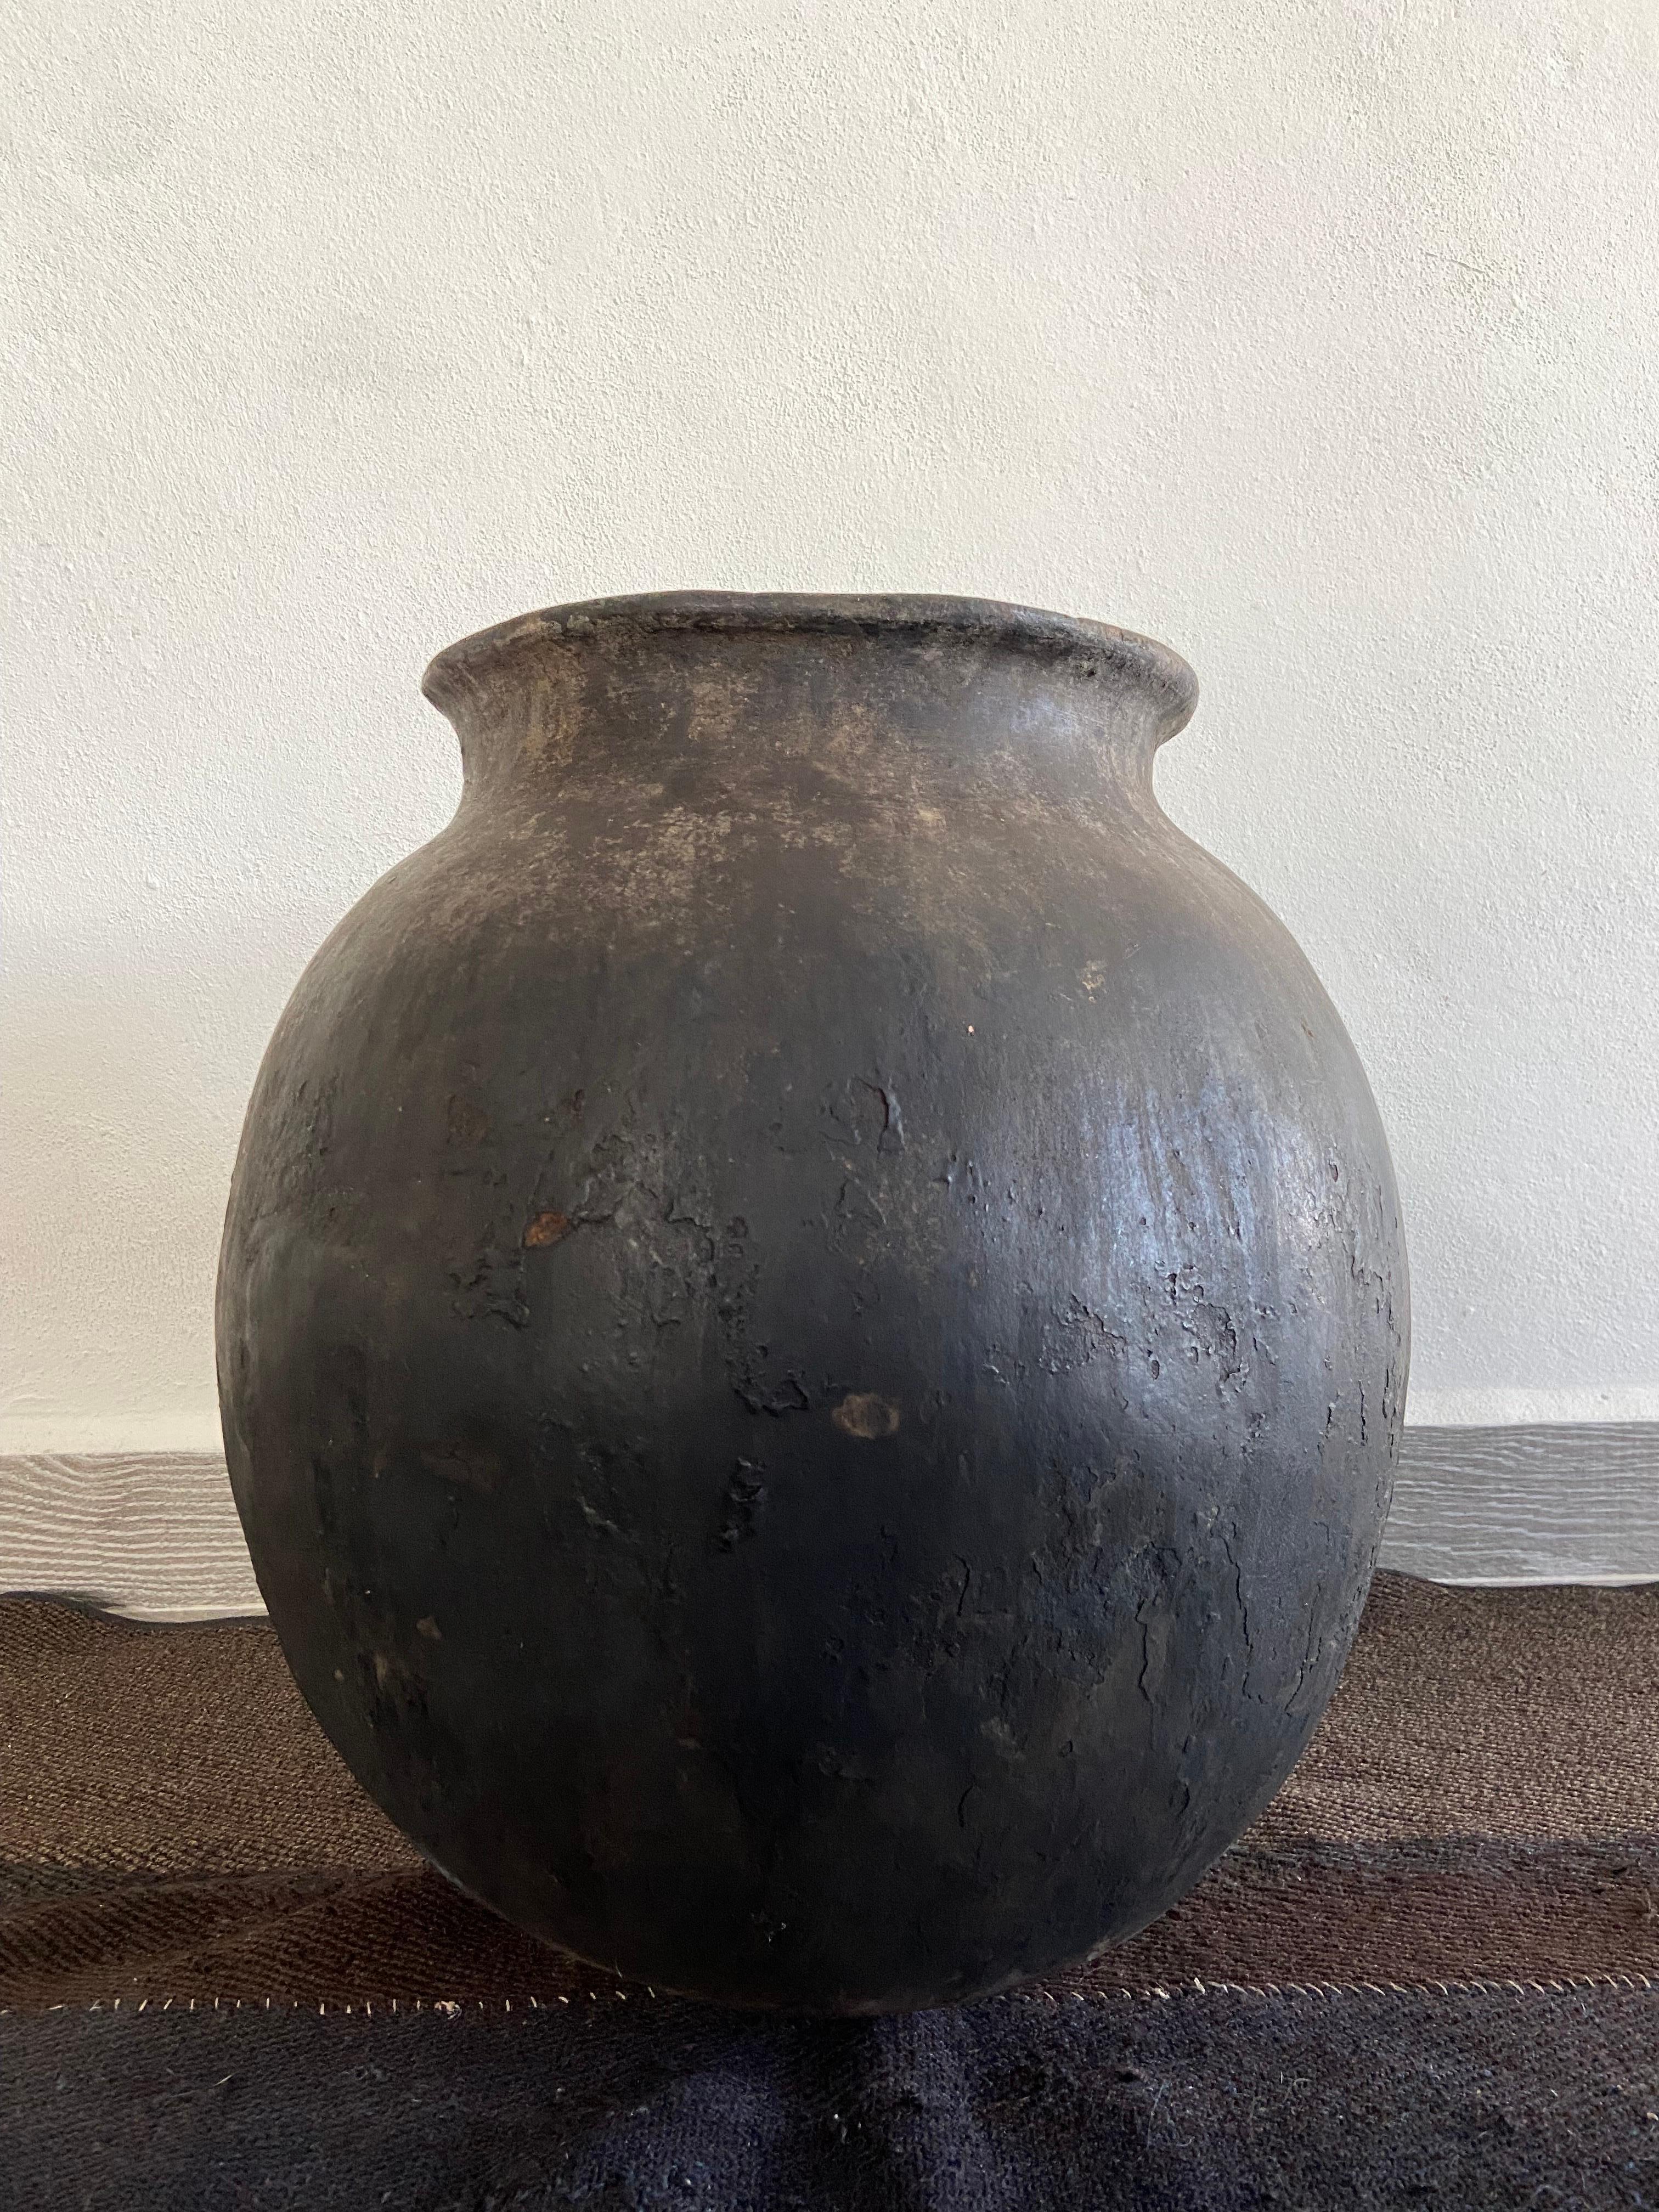 Early 20th century terracotta water jar from the high sierras of Michoacan, Mexico. The pot has an original repair on the bottom area as shown on the photos, however it was carried out very well.